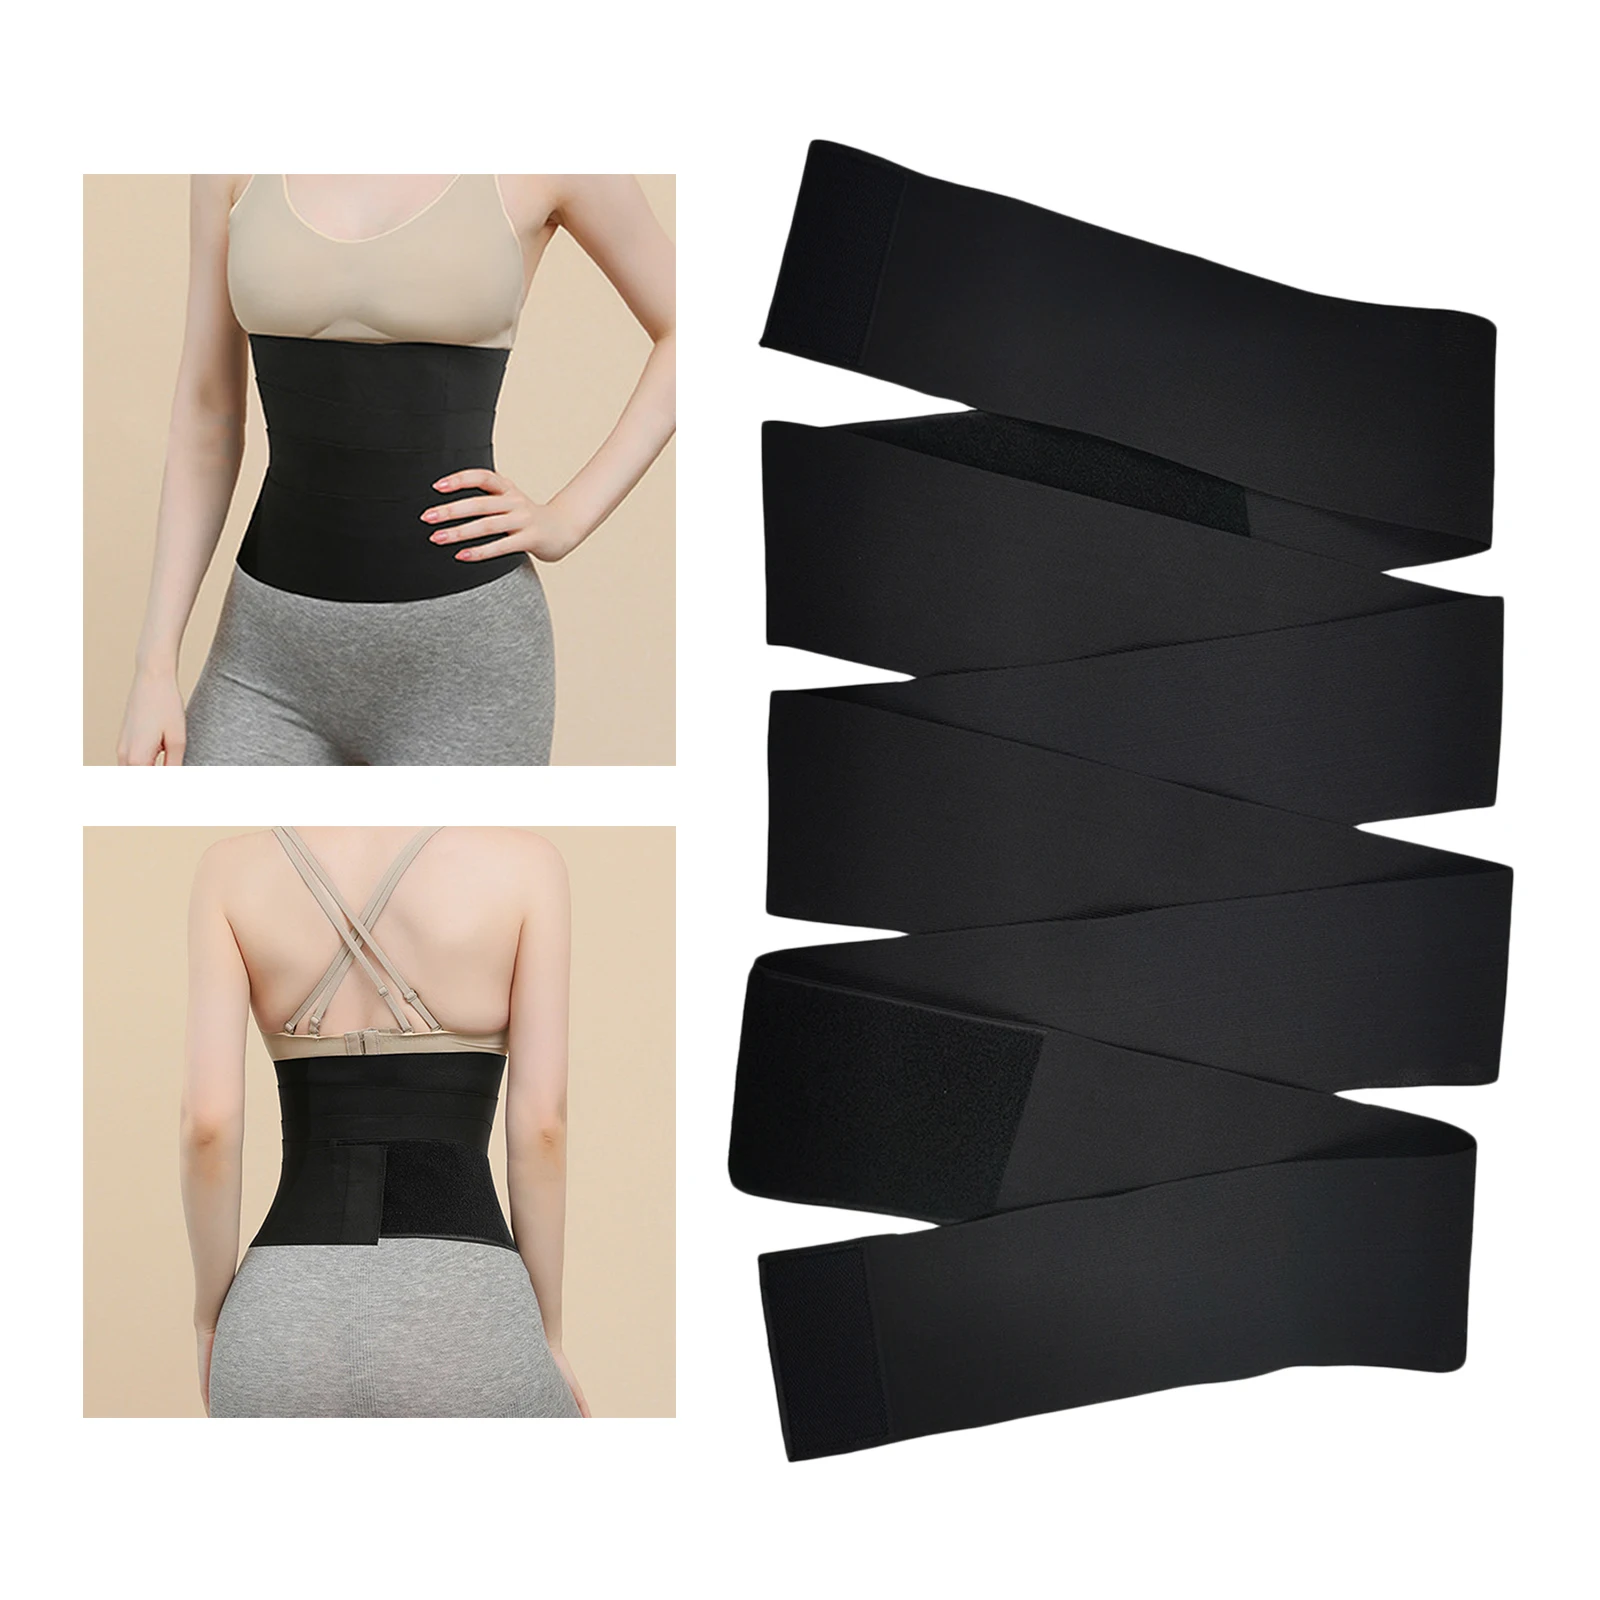 Invisible Bandage Wrap Body Shaper Tummy Wrap Slimming Tummy Wrap Weight Loss Body Shaper Waist Trimmer Belt Accessories